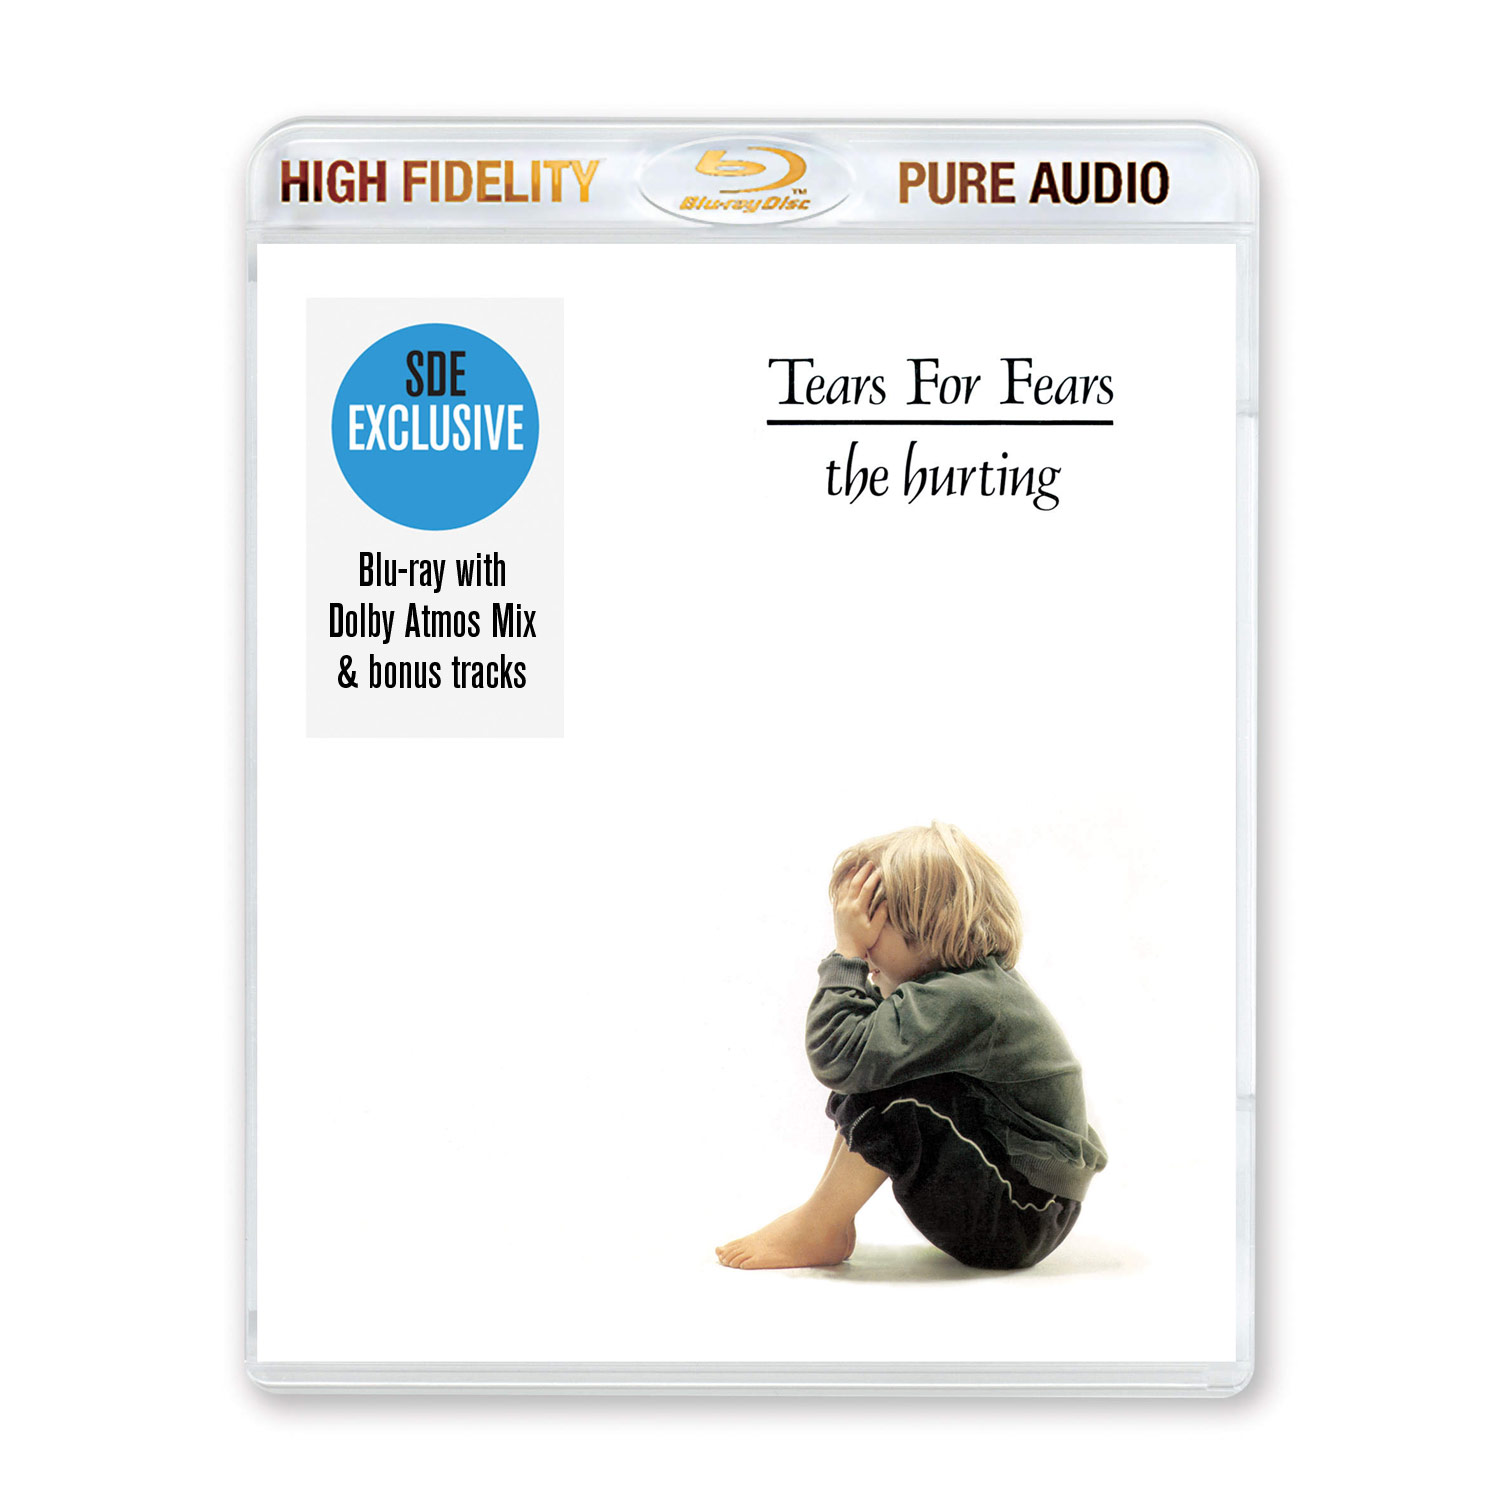 Tears For Fears / The Hurting SDEexclusive bluray audio unboxed